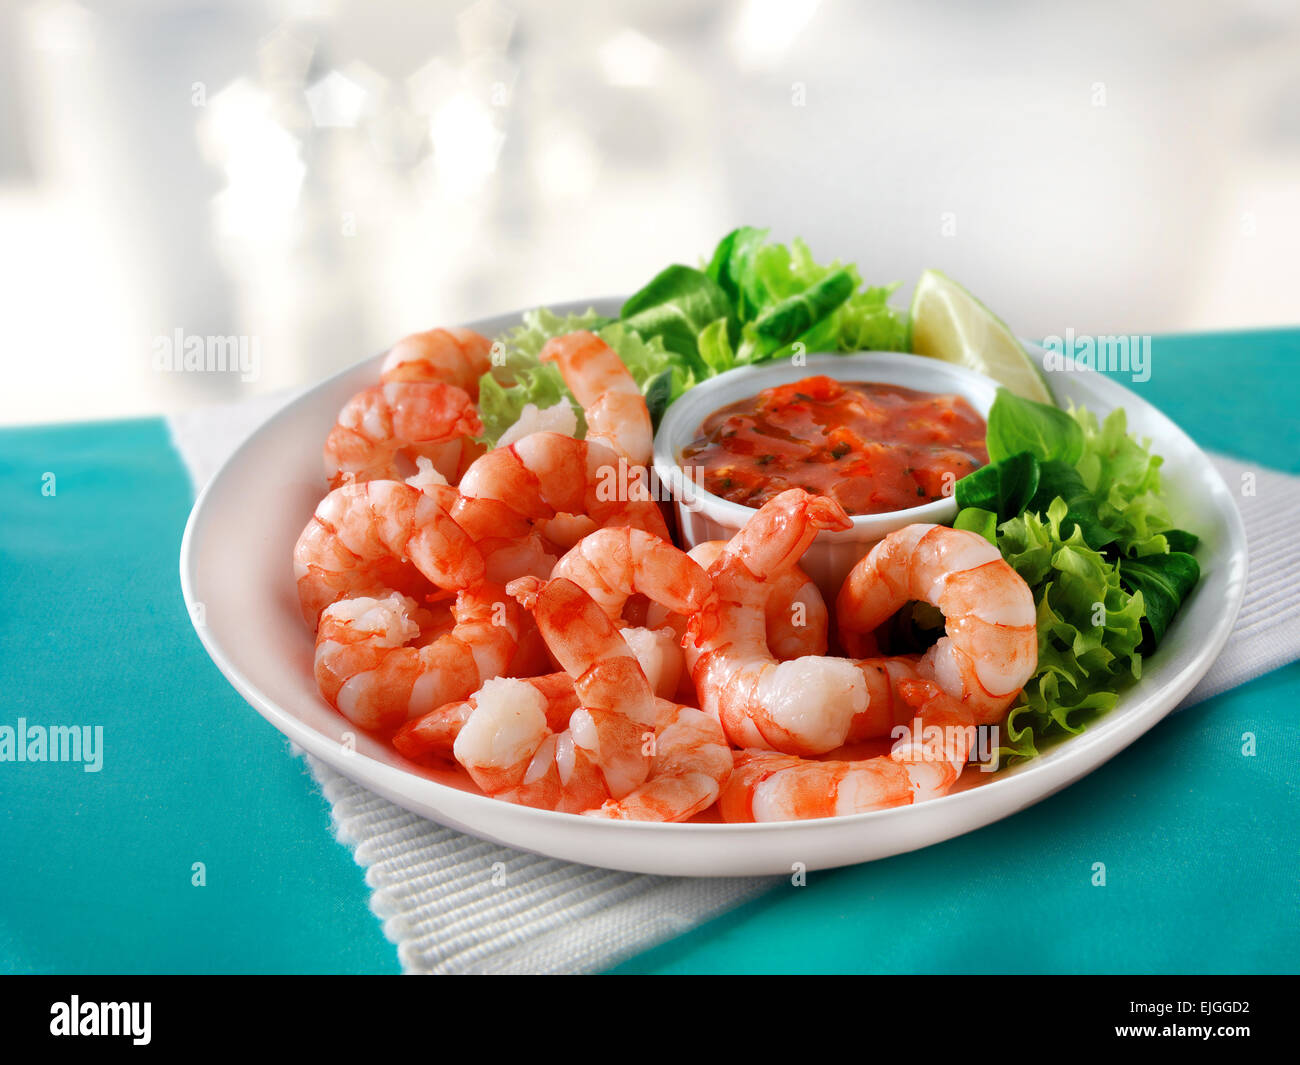 Cooked Tiger Prawns & salad and tomato sauce, served on a plate ready to eat Stock Photo